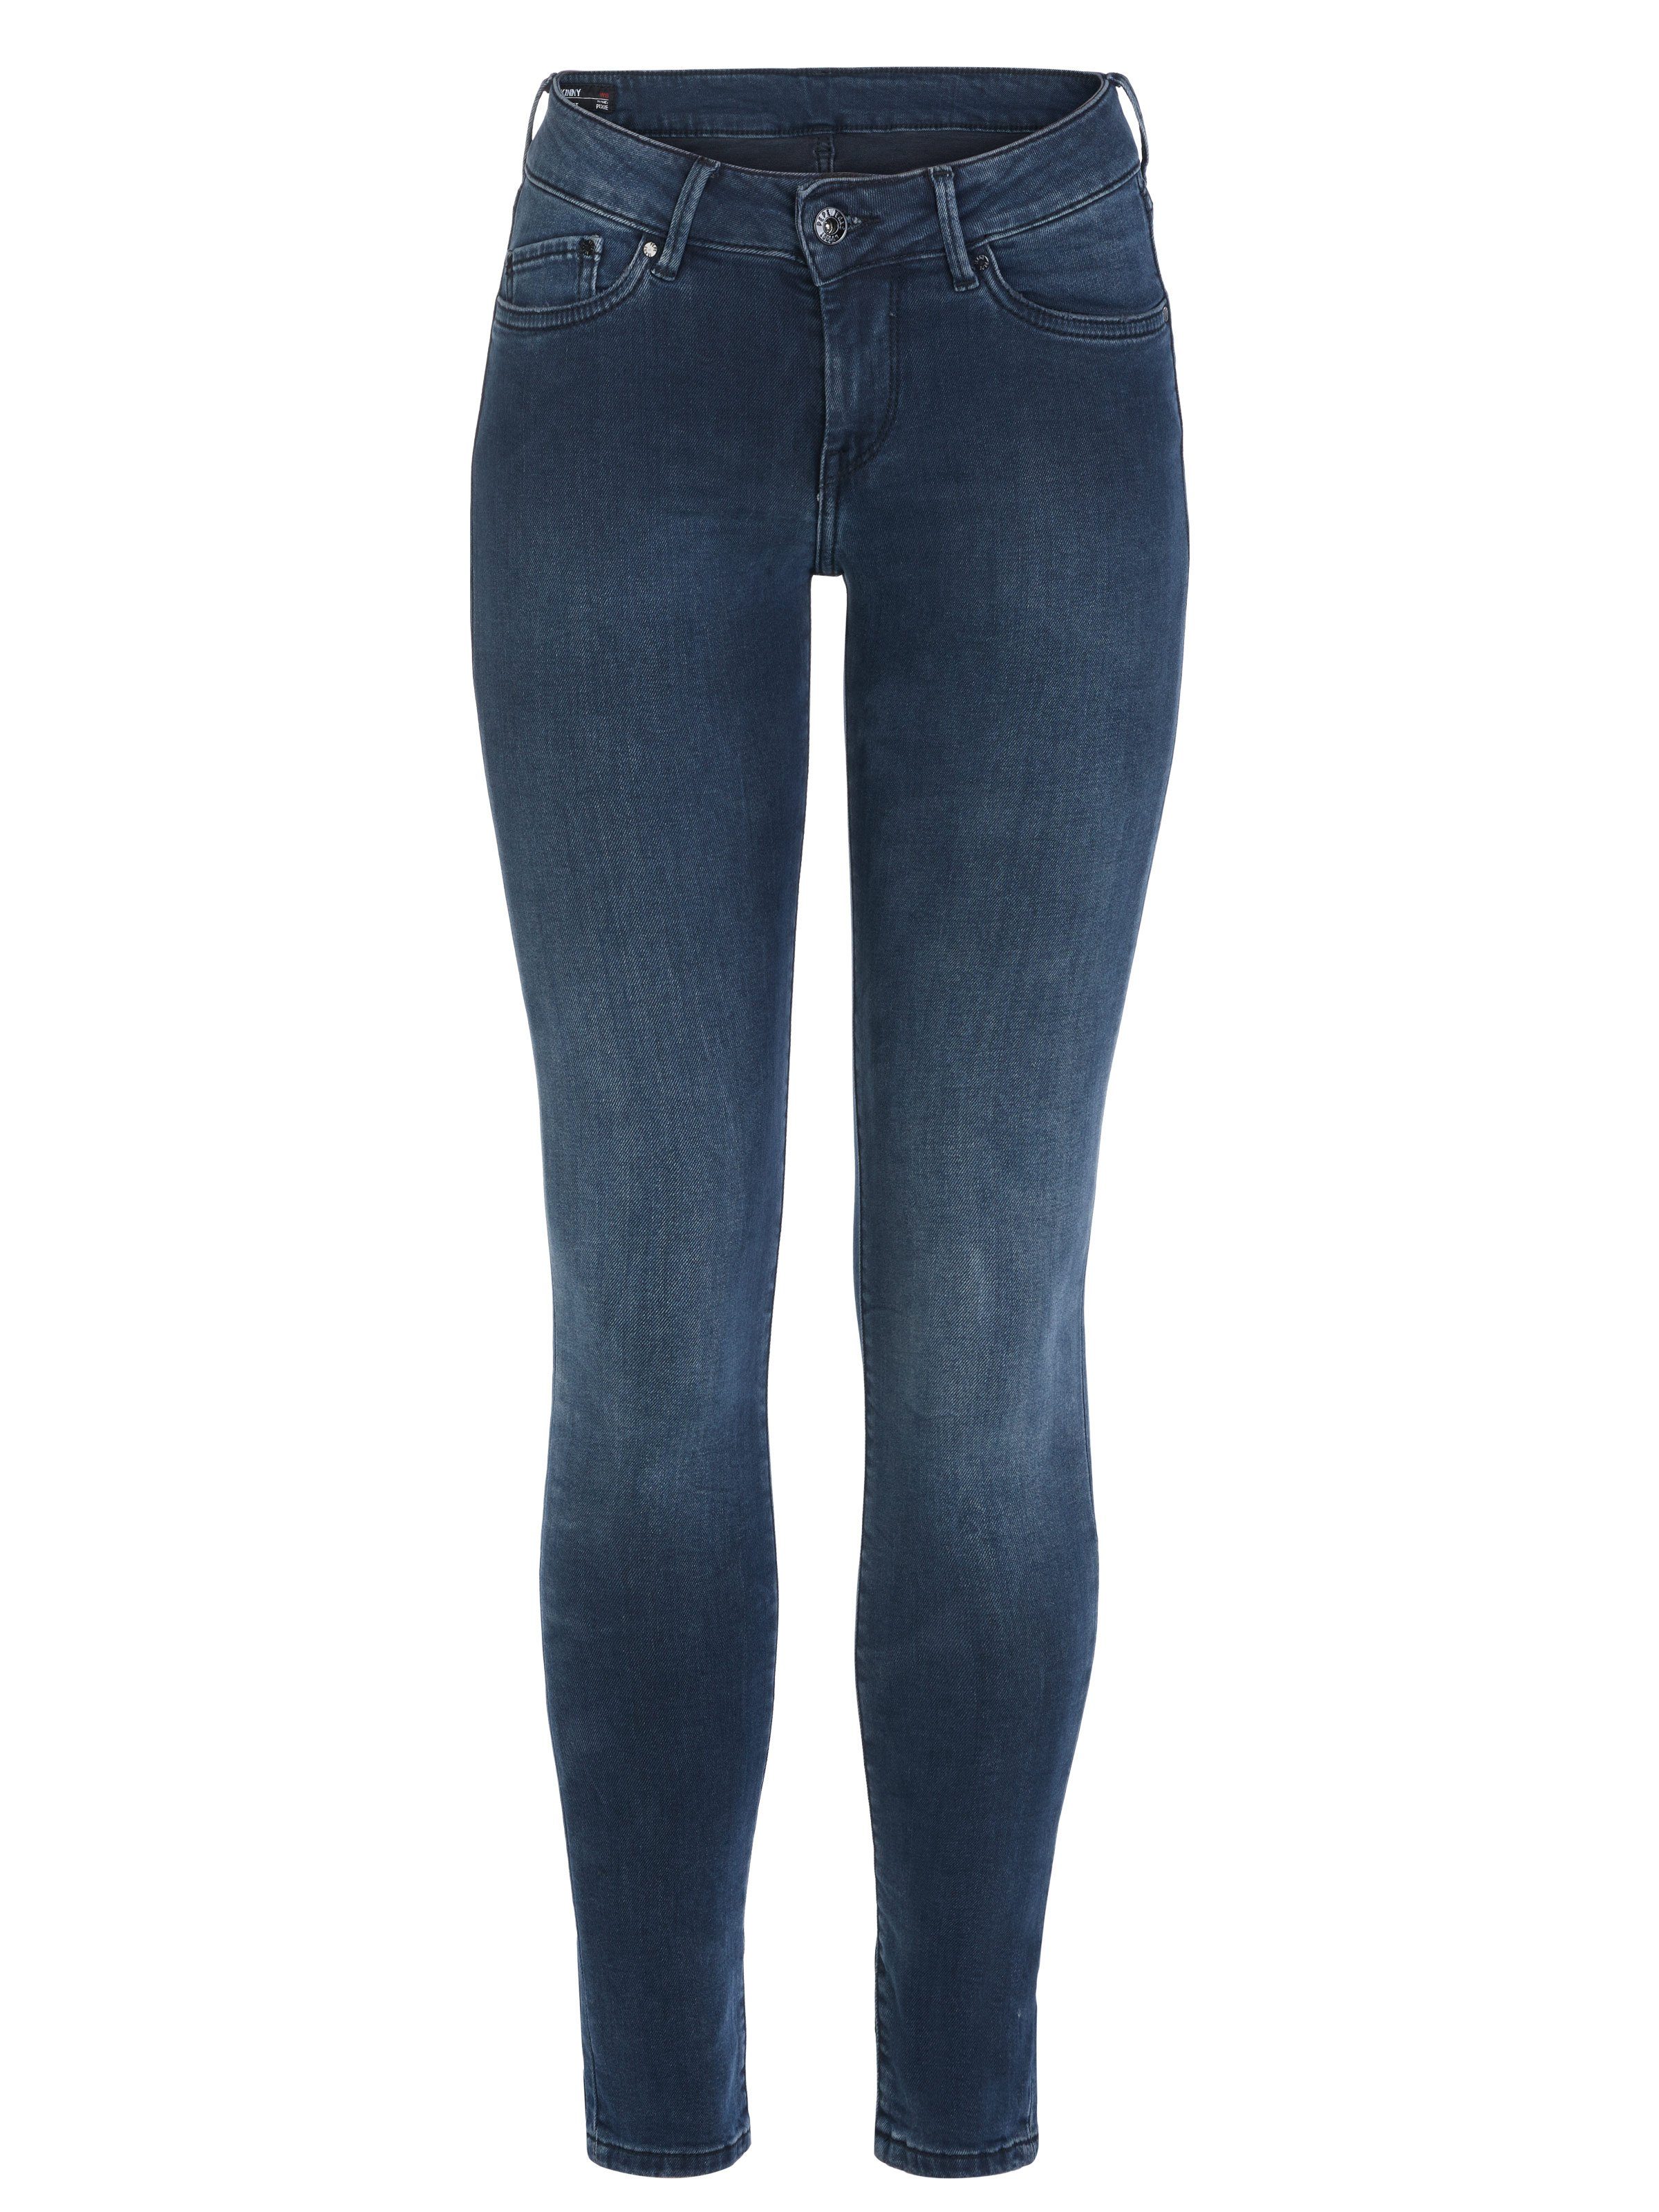 Jeans Pepe Pepe Slim-fit-Jeans Jeans Jeans